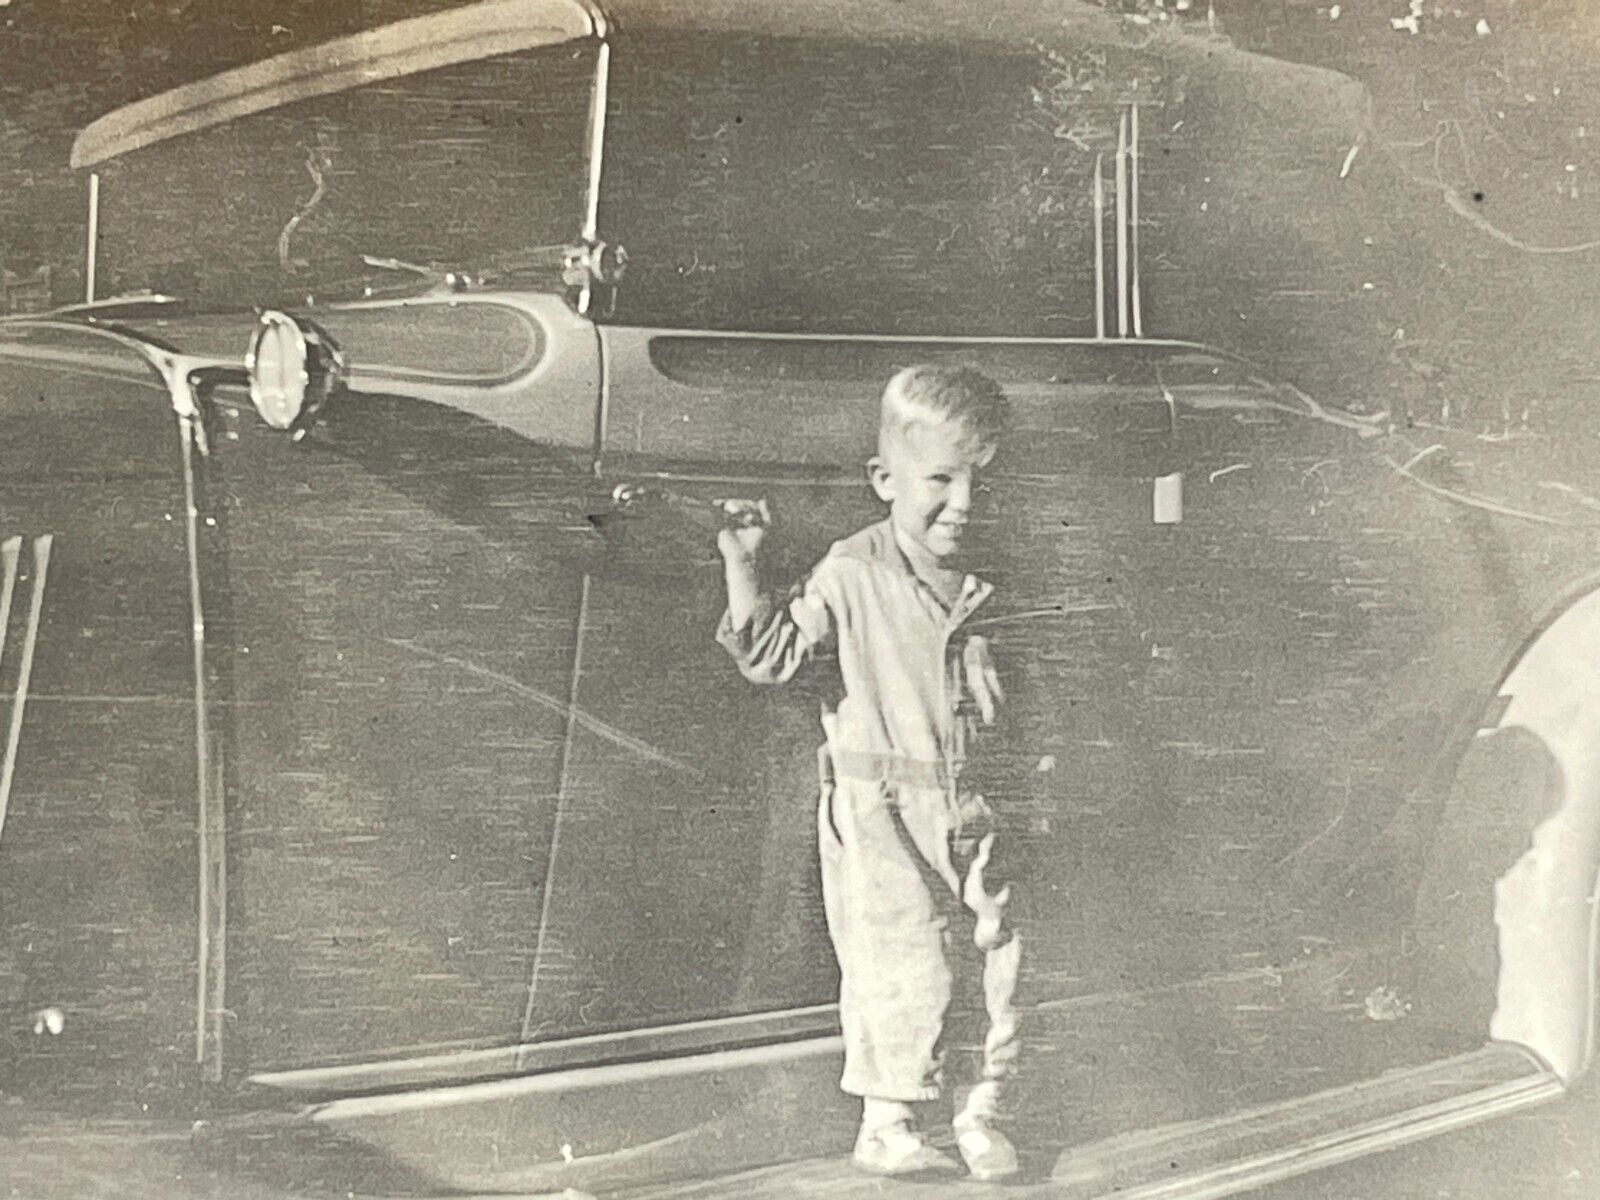 K9 Photograph Boy And Old Car 1920-30's